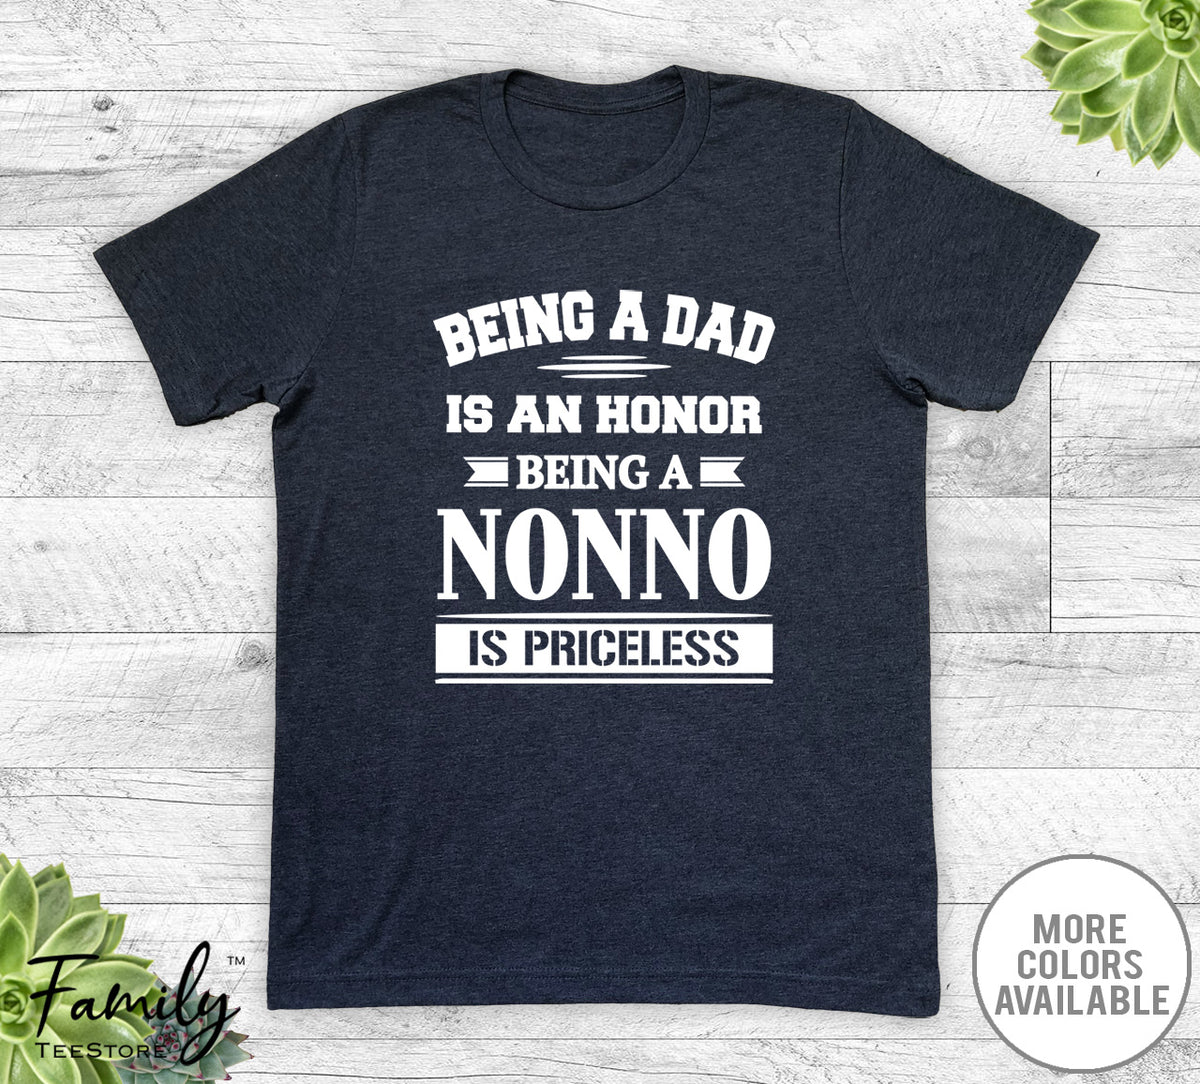 Being A Dad Is An Honor Being A Nonno Is Priceless - Unisex T-shirt - Nonno Shirt - Nonno Gift - familyteeprints